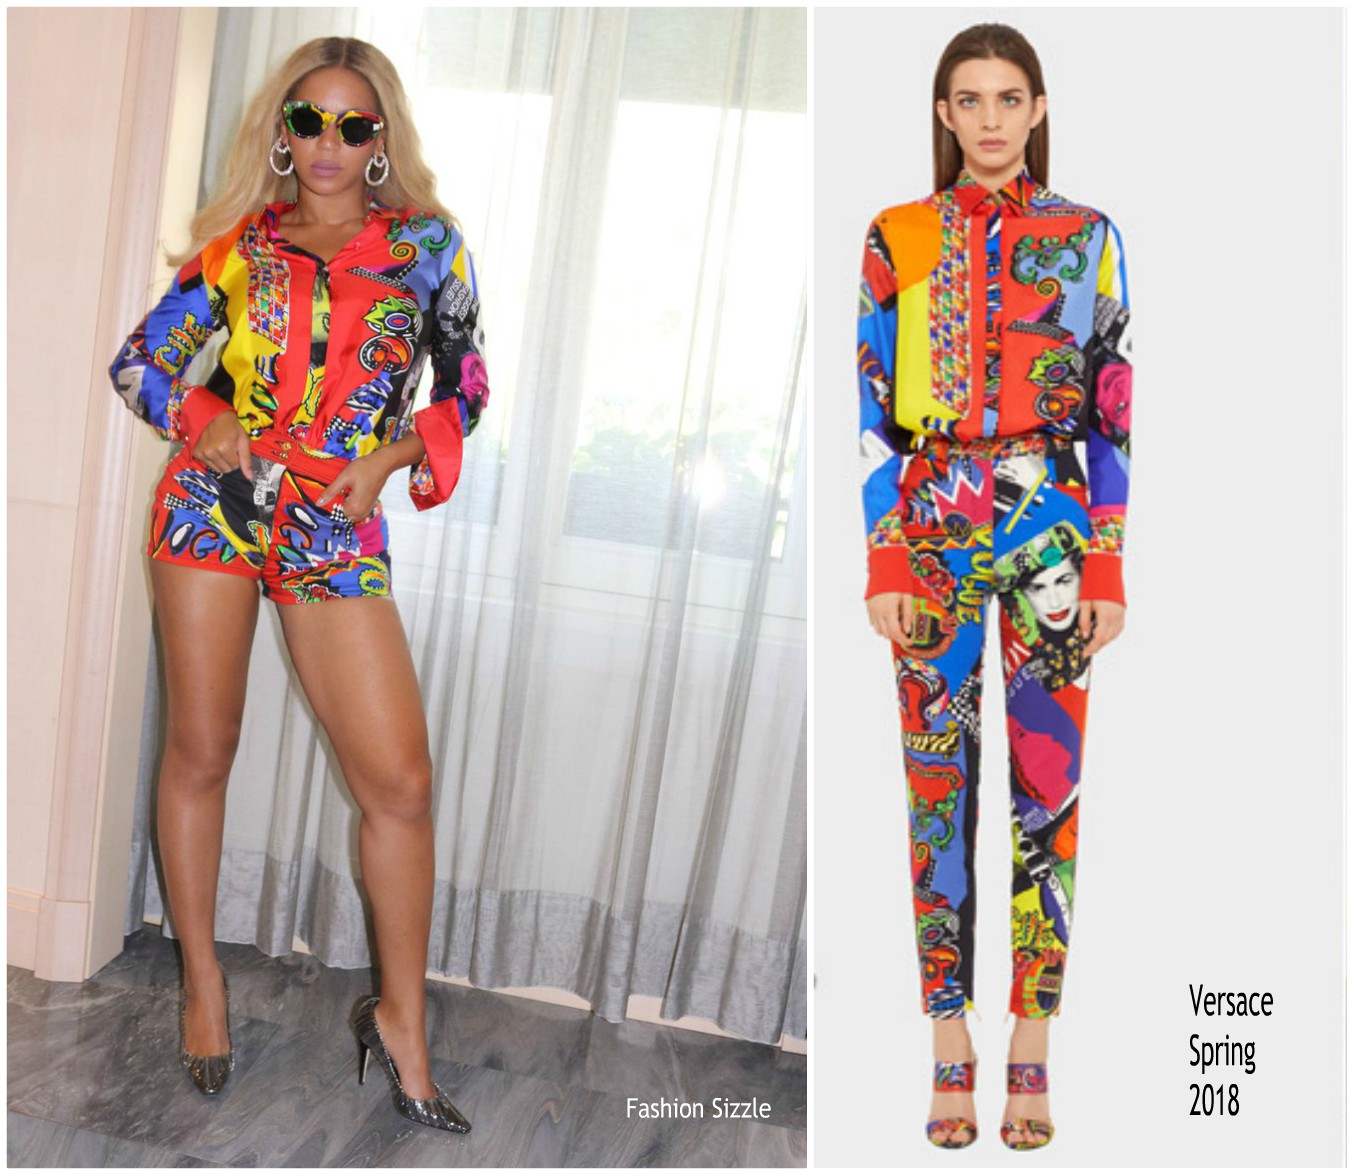 beyonce-knowles-vacations-in-versace